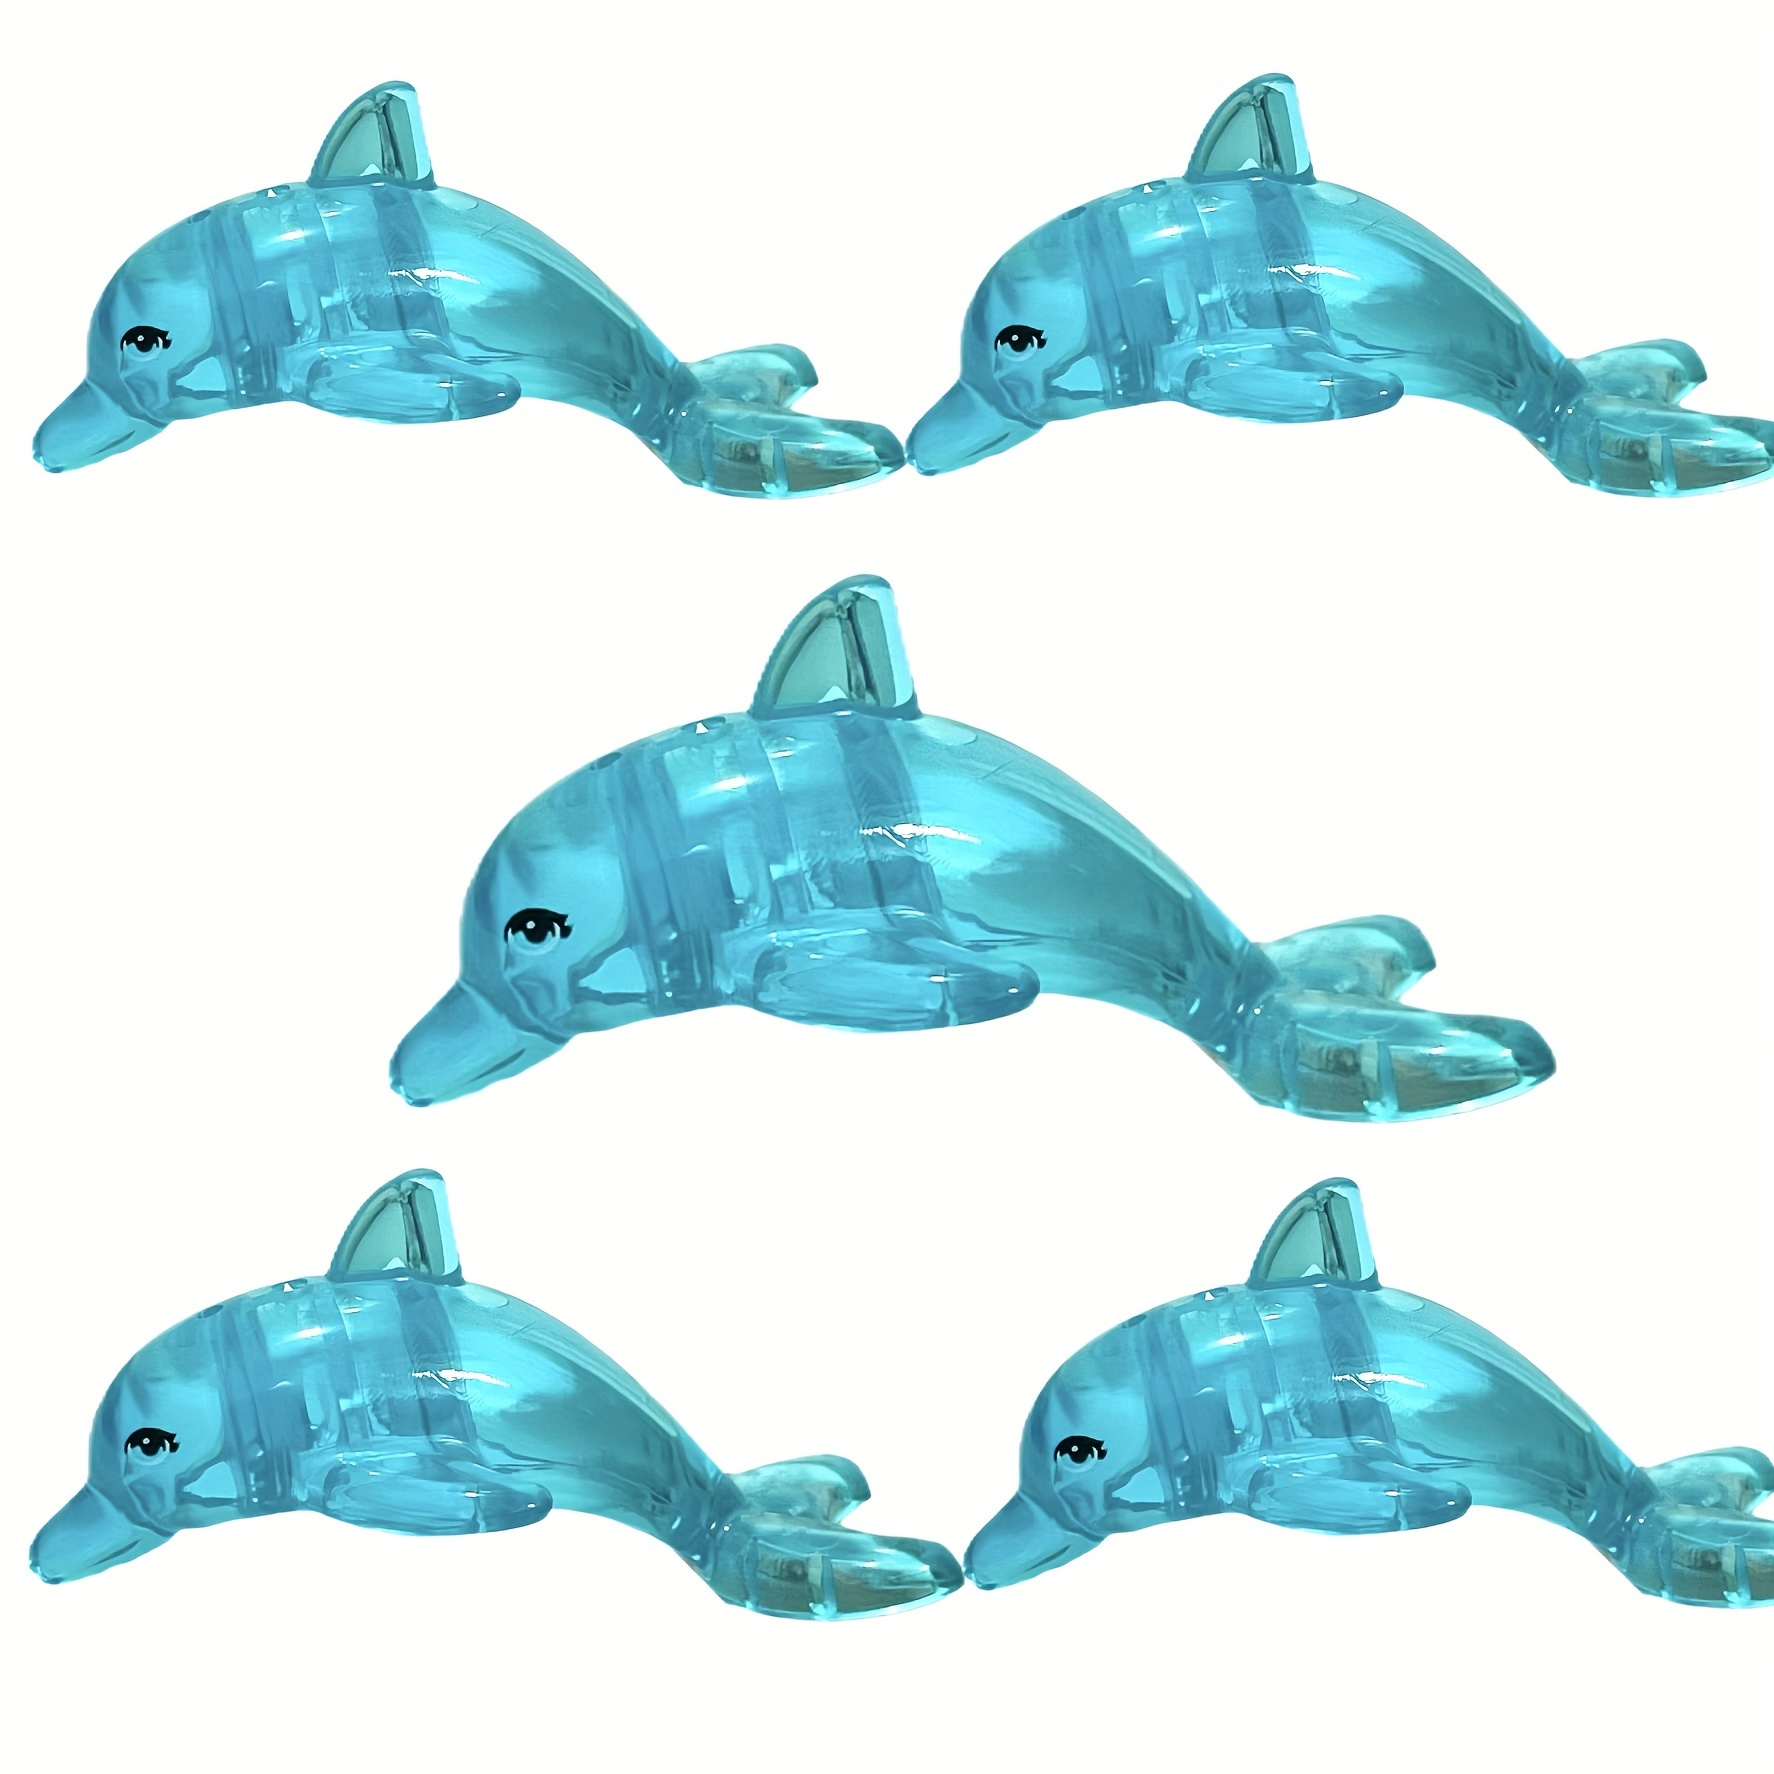 

Ideamoc Dolphin & Ocean Friends 5pcs Mini Building Block Set - Cute Anime Sea Creatures, Diy Assembly Toy For Kids Ages 3-6, Perfect Birthday Gift Mermaid Toys Ocean Animal Toys